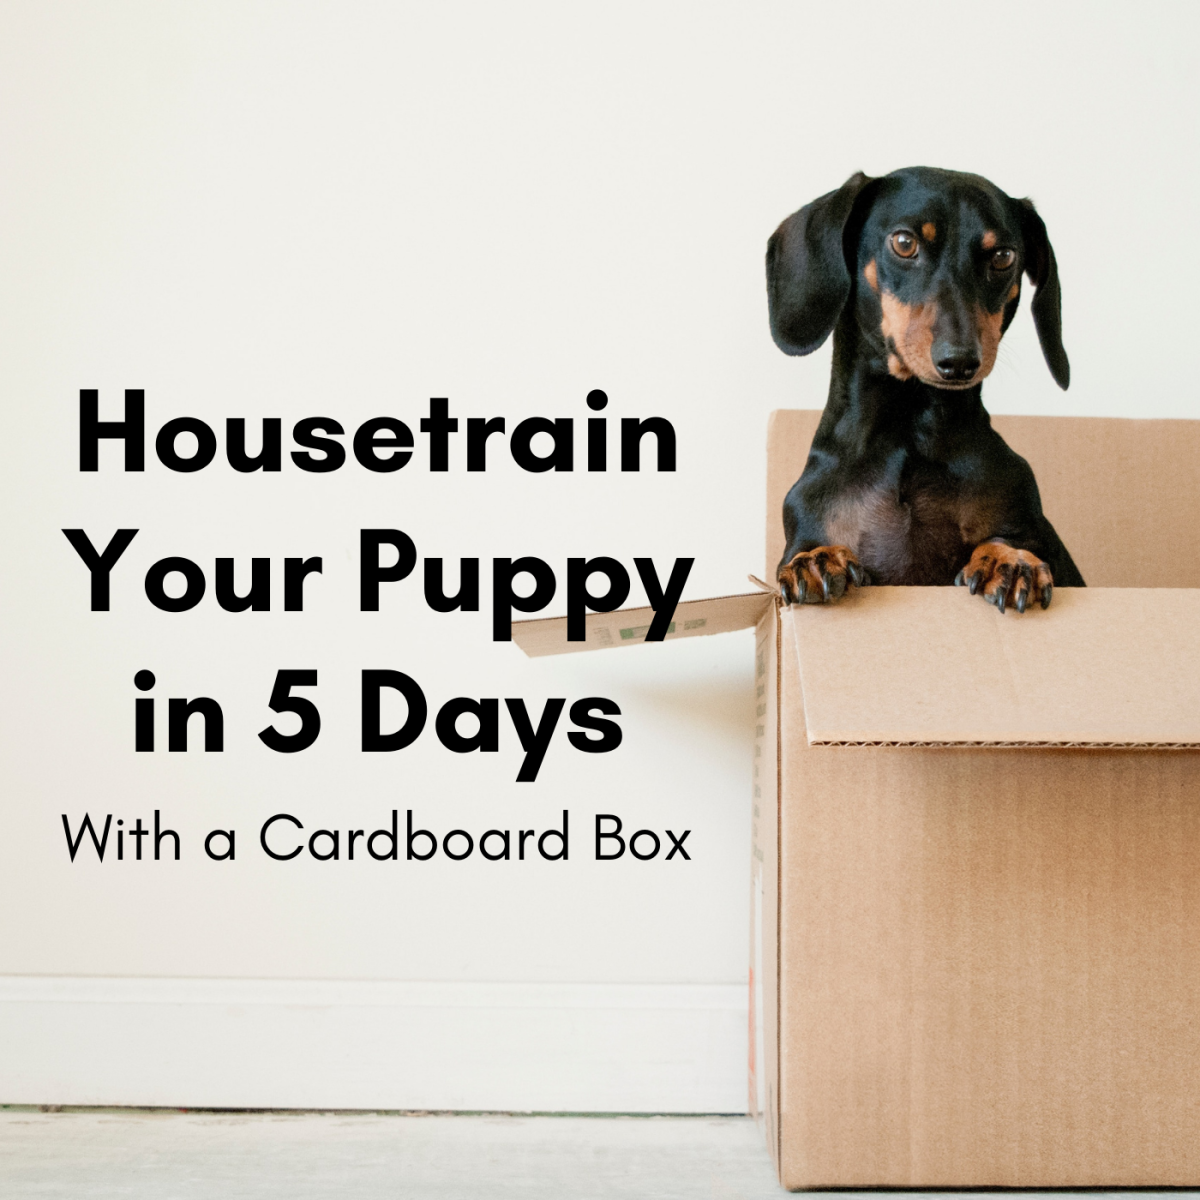 How to Housetrain a Puppy in 5 Days Using a Cardboard Box